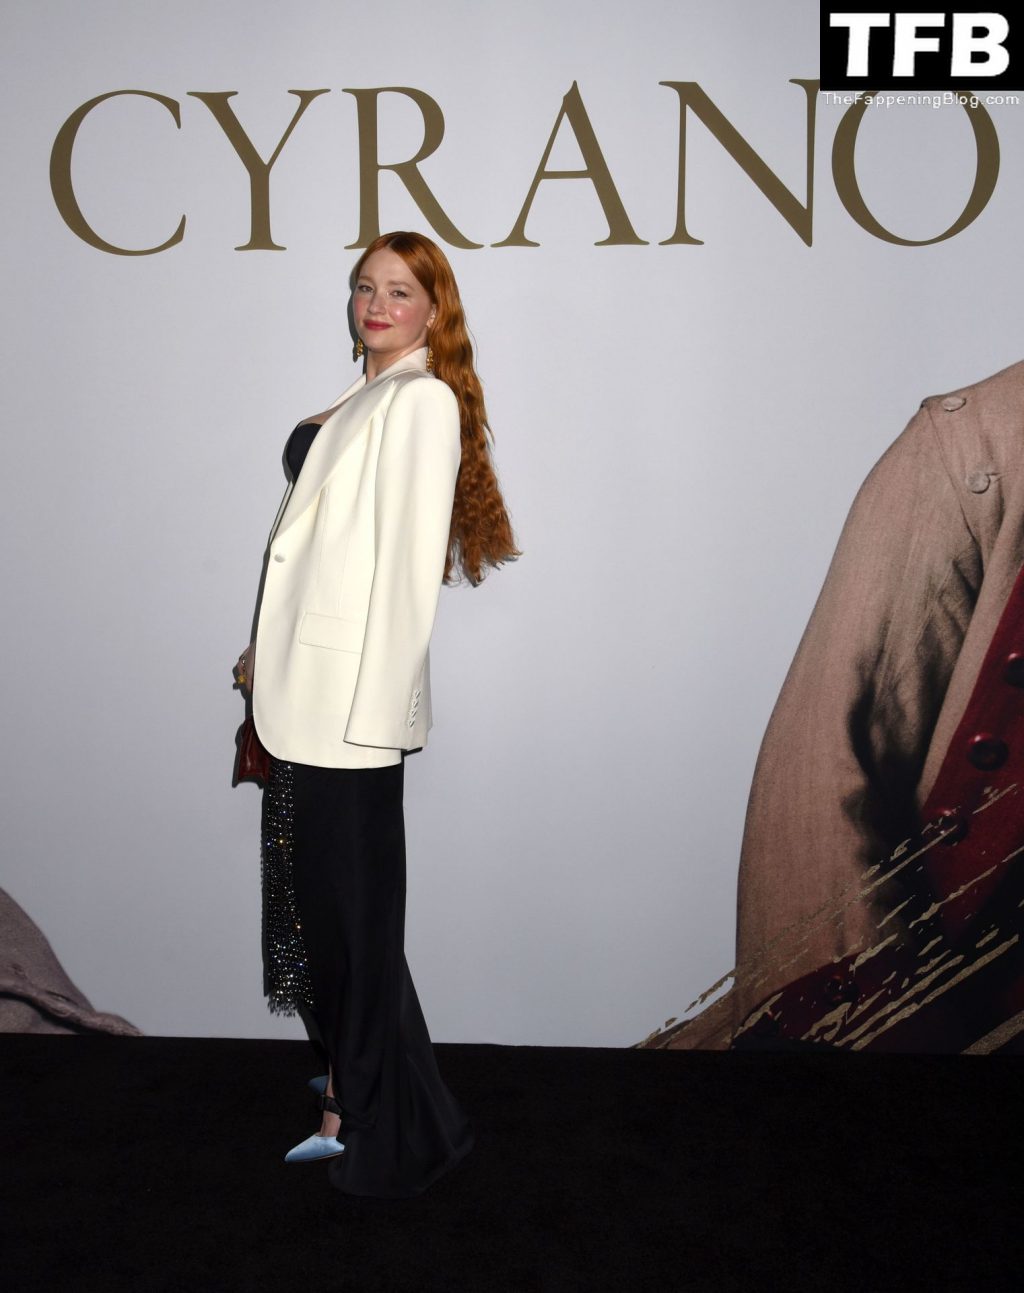 Haley Bennett Sexy The Fappening Blog 32 1024x1293 - Haley Bennett Shows Off Her Sexy Boobs at the Premiere of “Cyrano” in NYC (43 Photos)